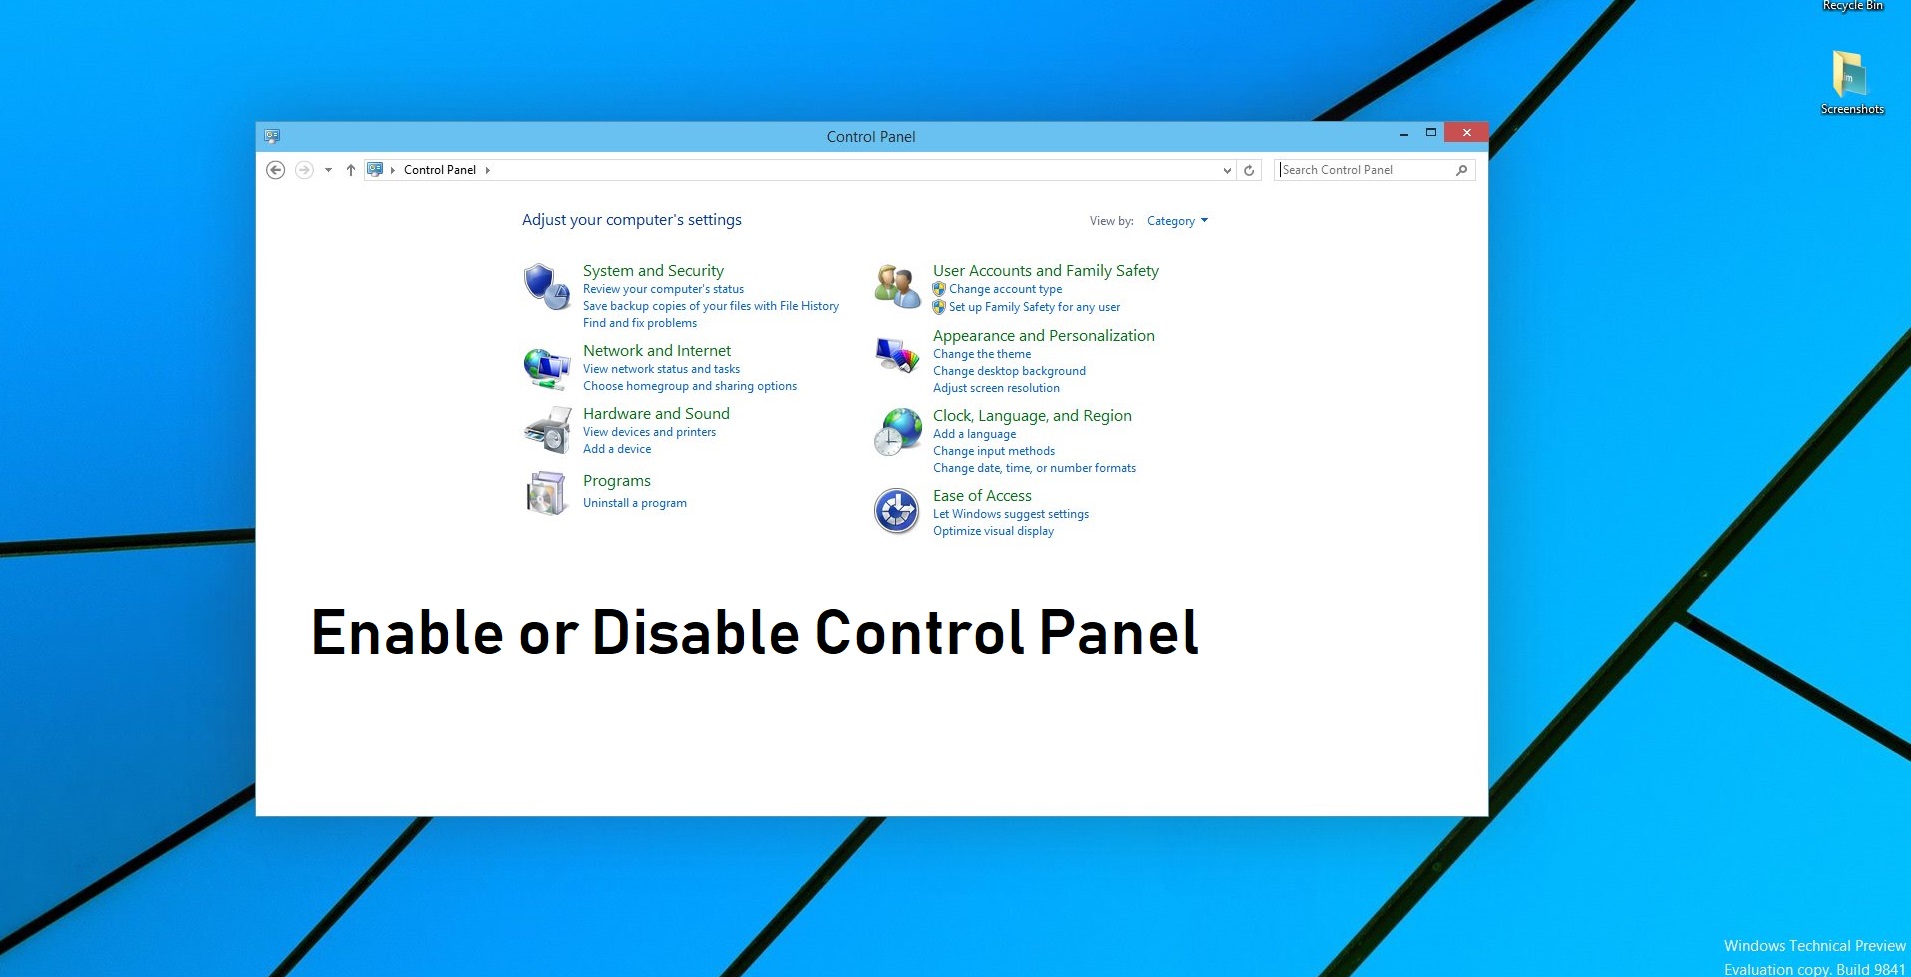 How to Enable or Disable Control Panel and windows 10 settings?